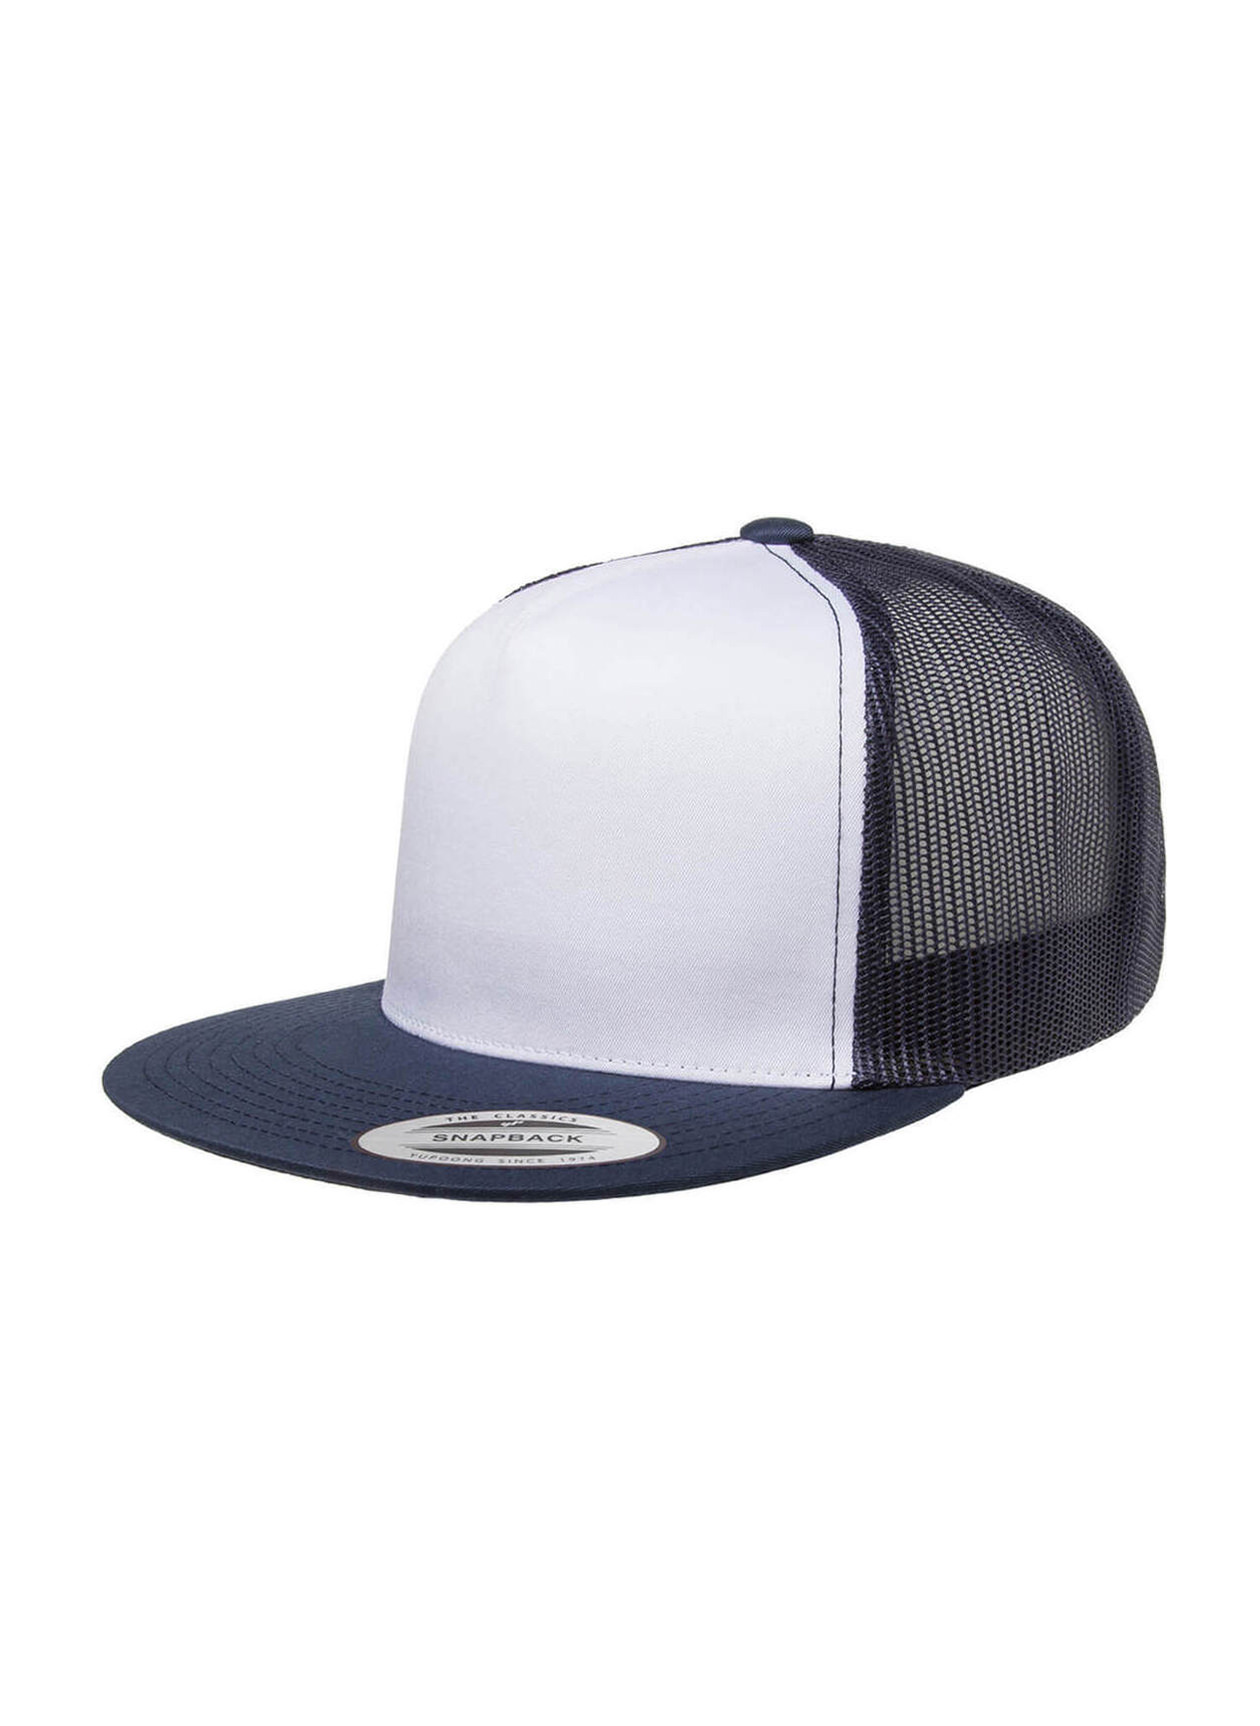 Yupoong Navy / White Classic Trucker with White Front Panel Hat